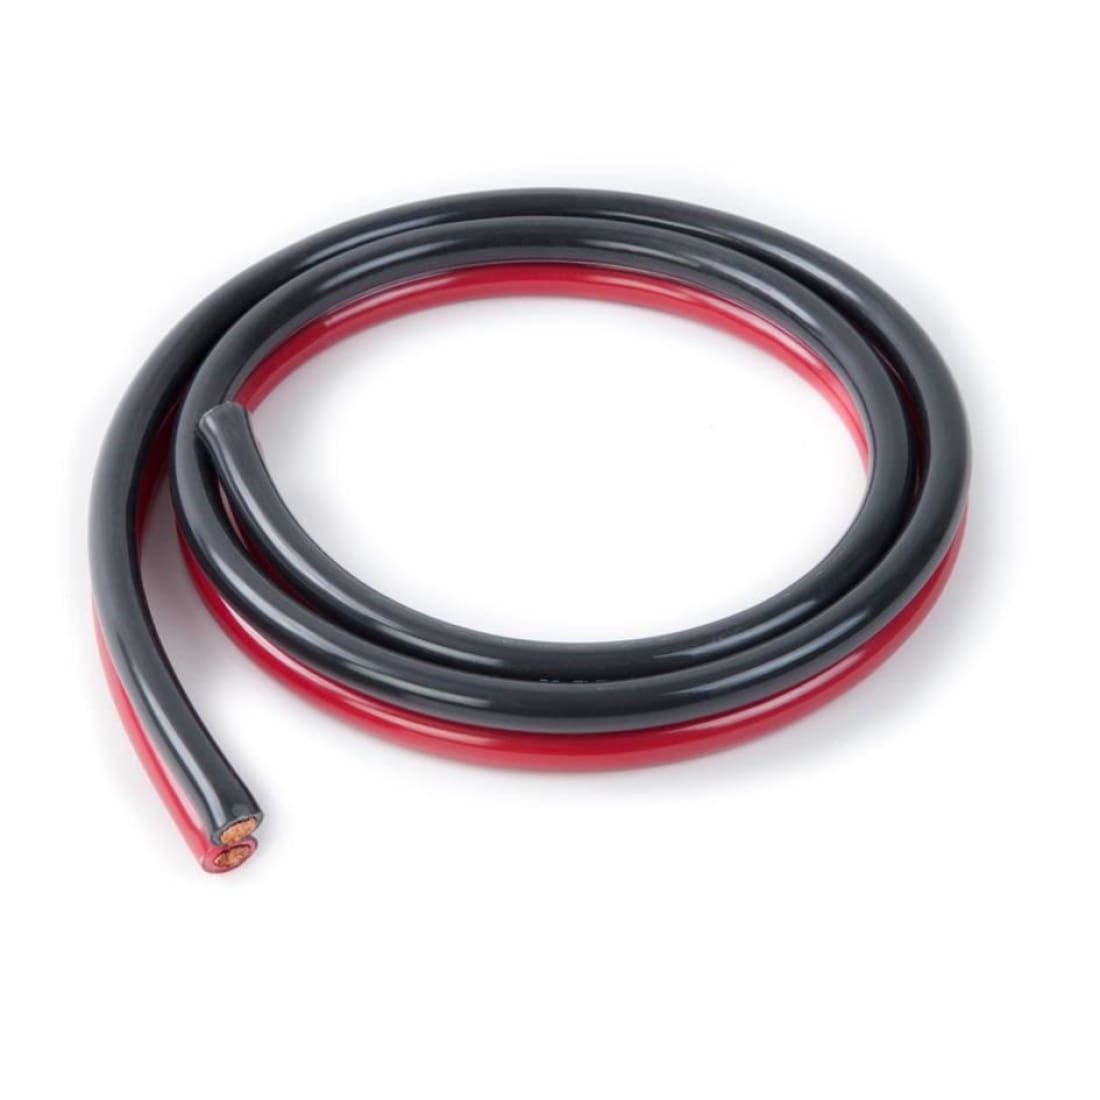 TWIN-FLEX 450/750V HIGHLY FLEXIBLE TWIN CABLE Red/Blac Class 6 - Battery Cable